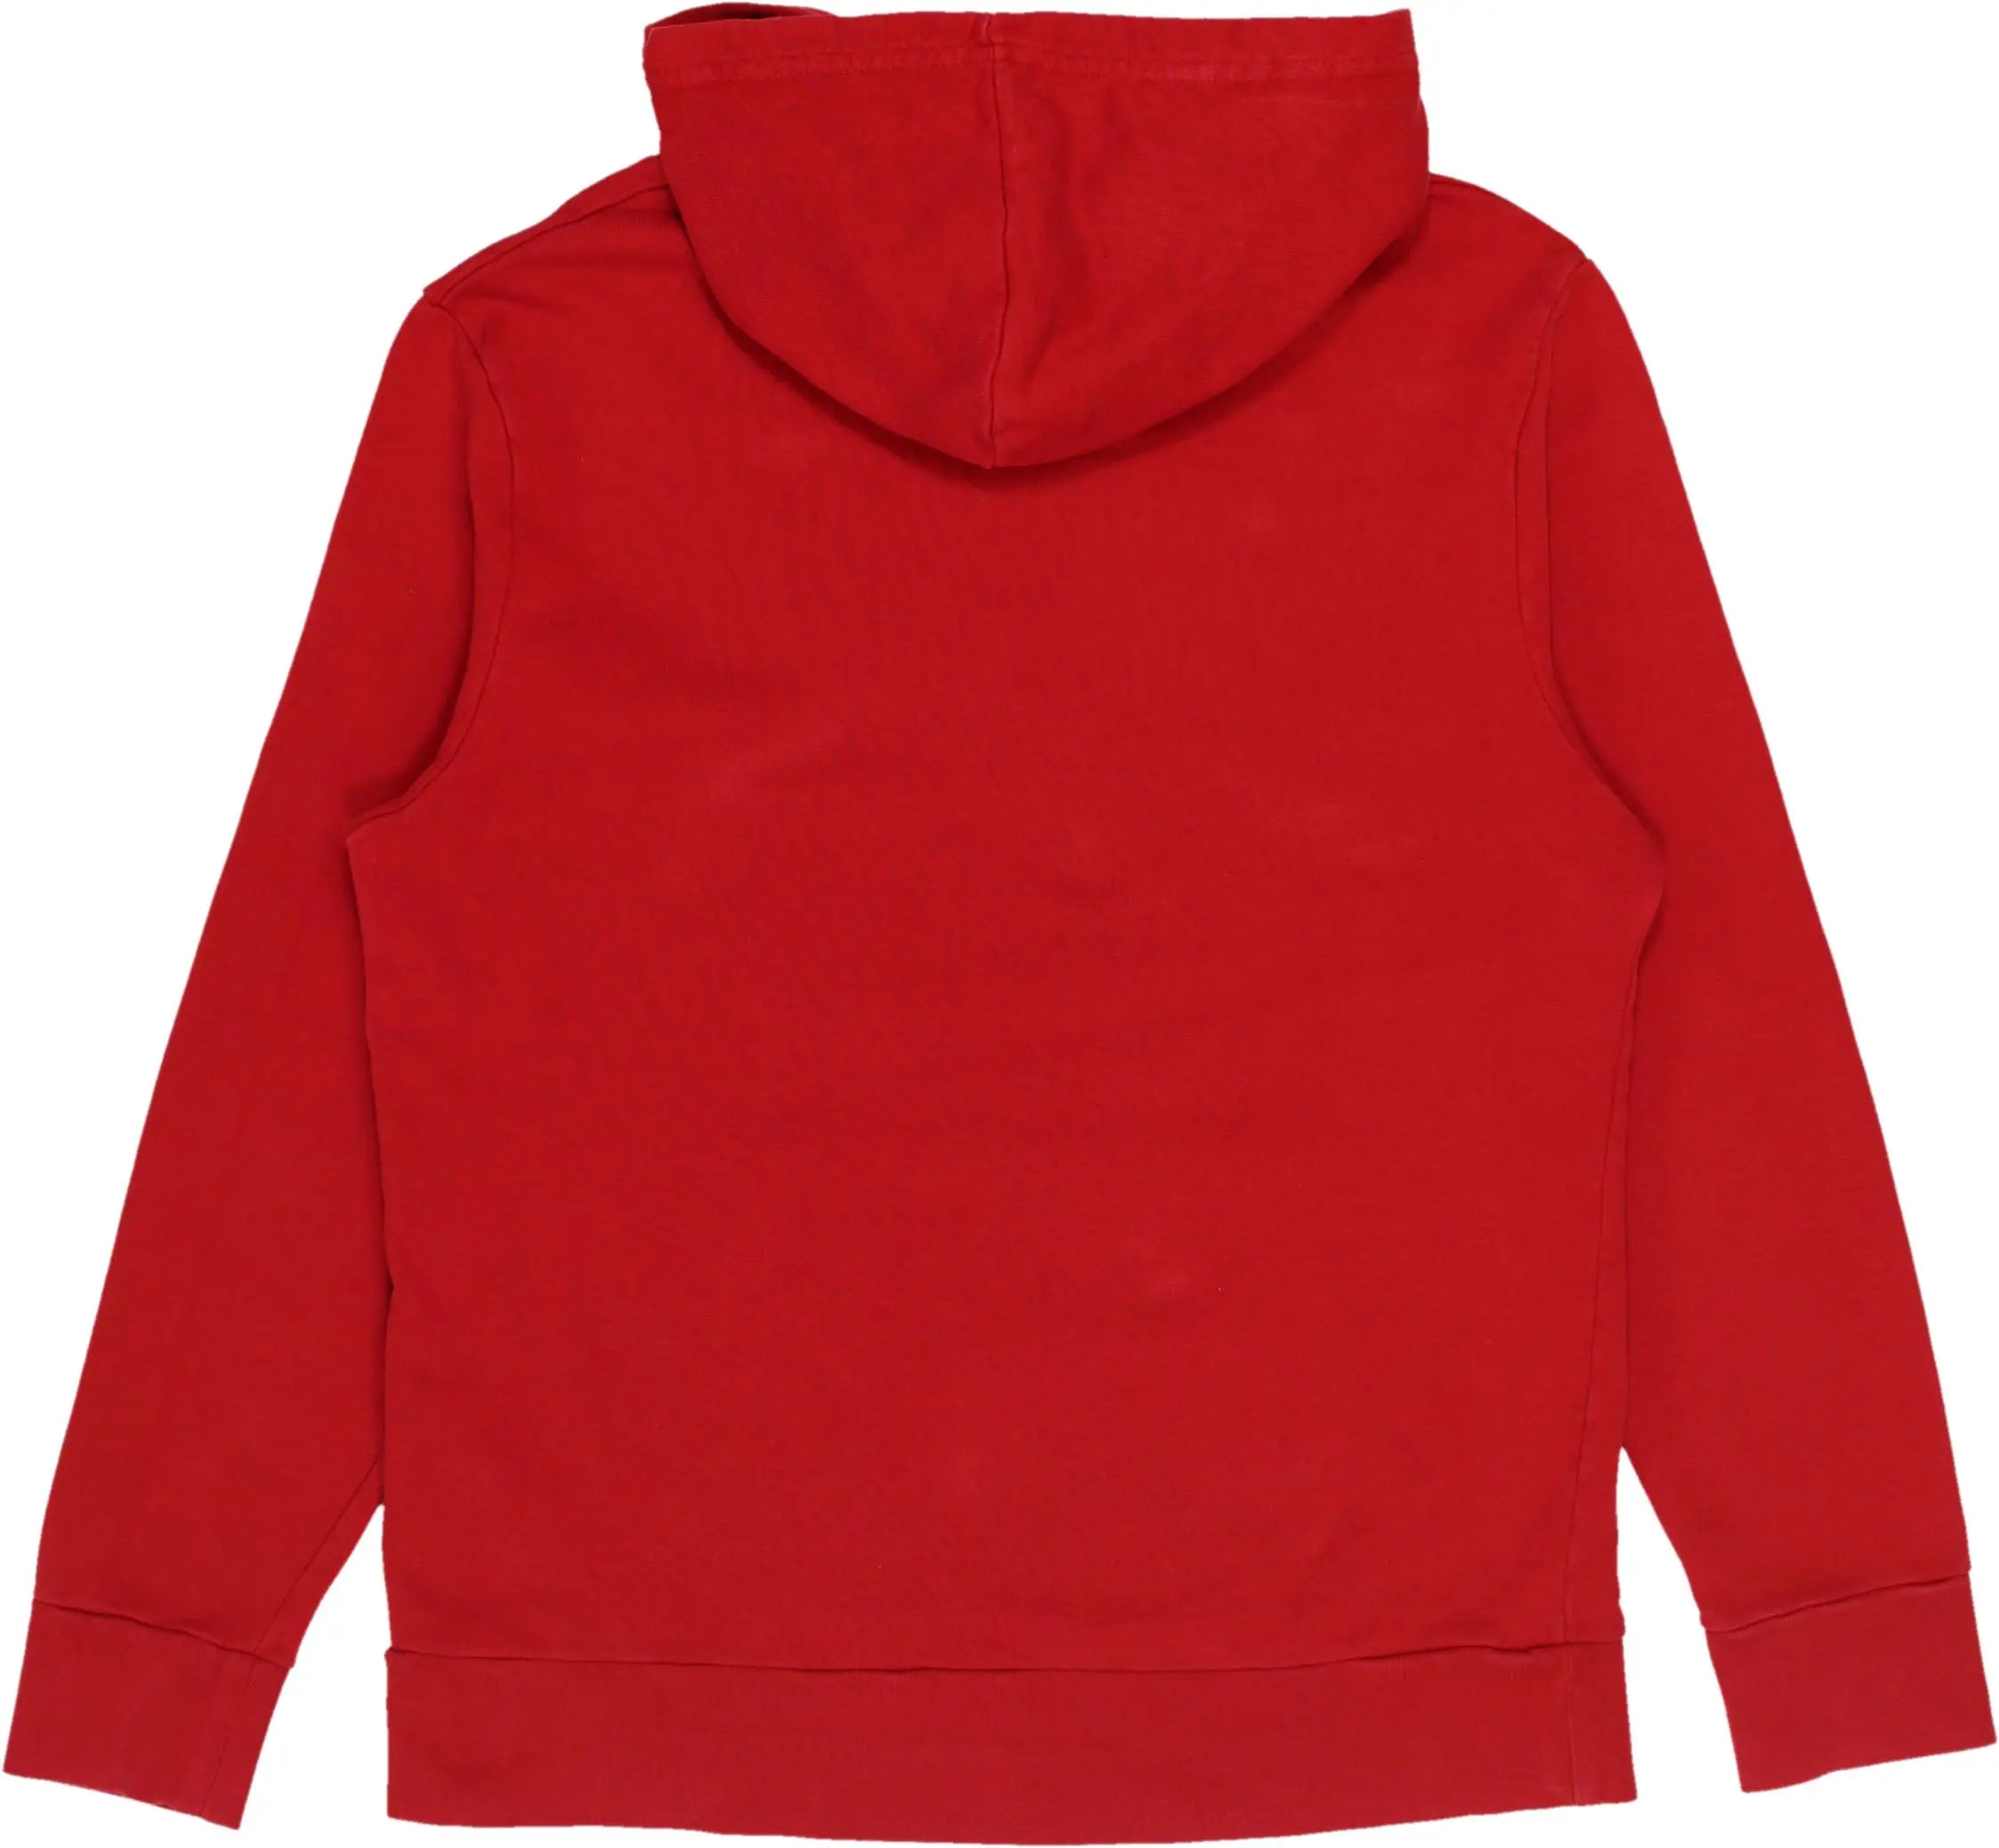 Levi's - Red Hoodie by Levi's- ThriftTale.com - Vintage and second handclothing